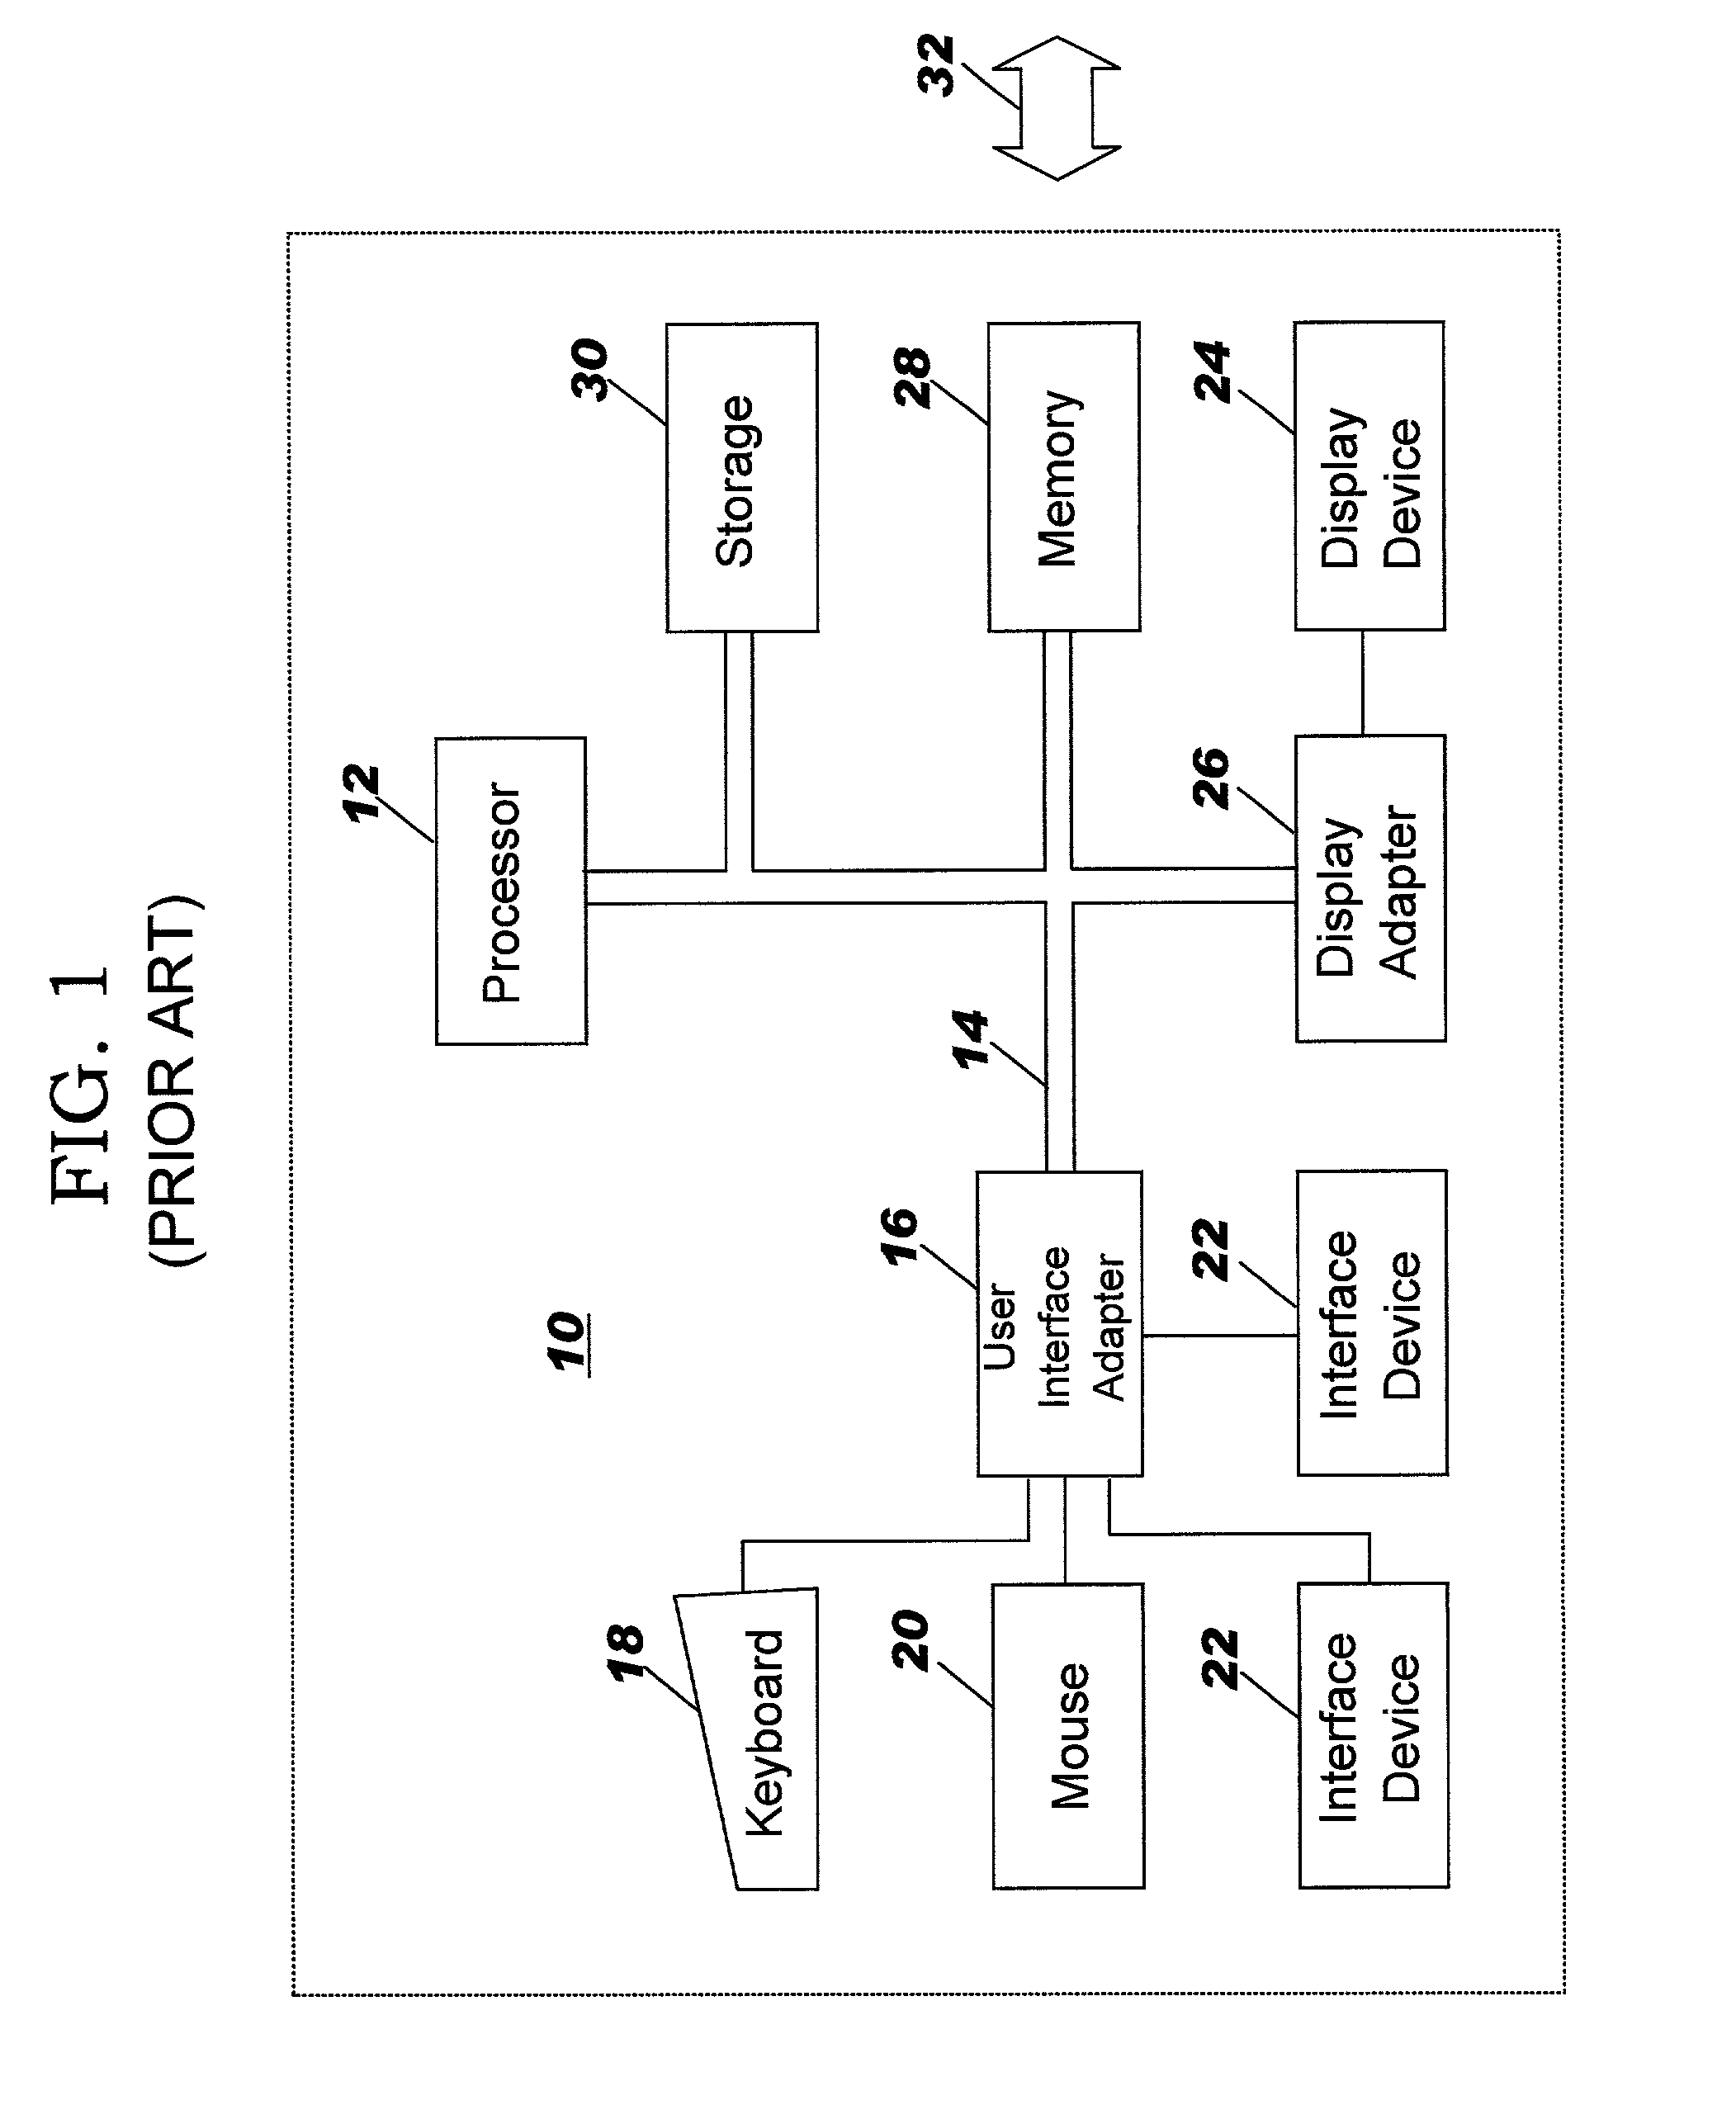 Object model and framework for installation of software packages using a distributed directory